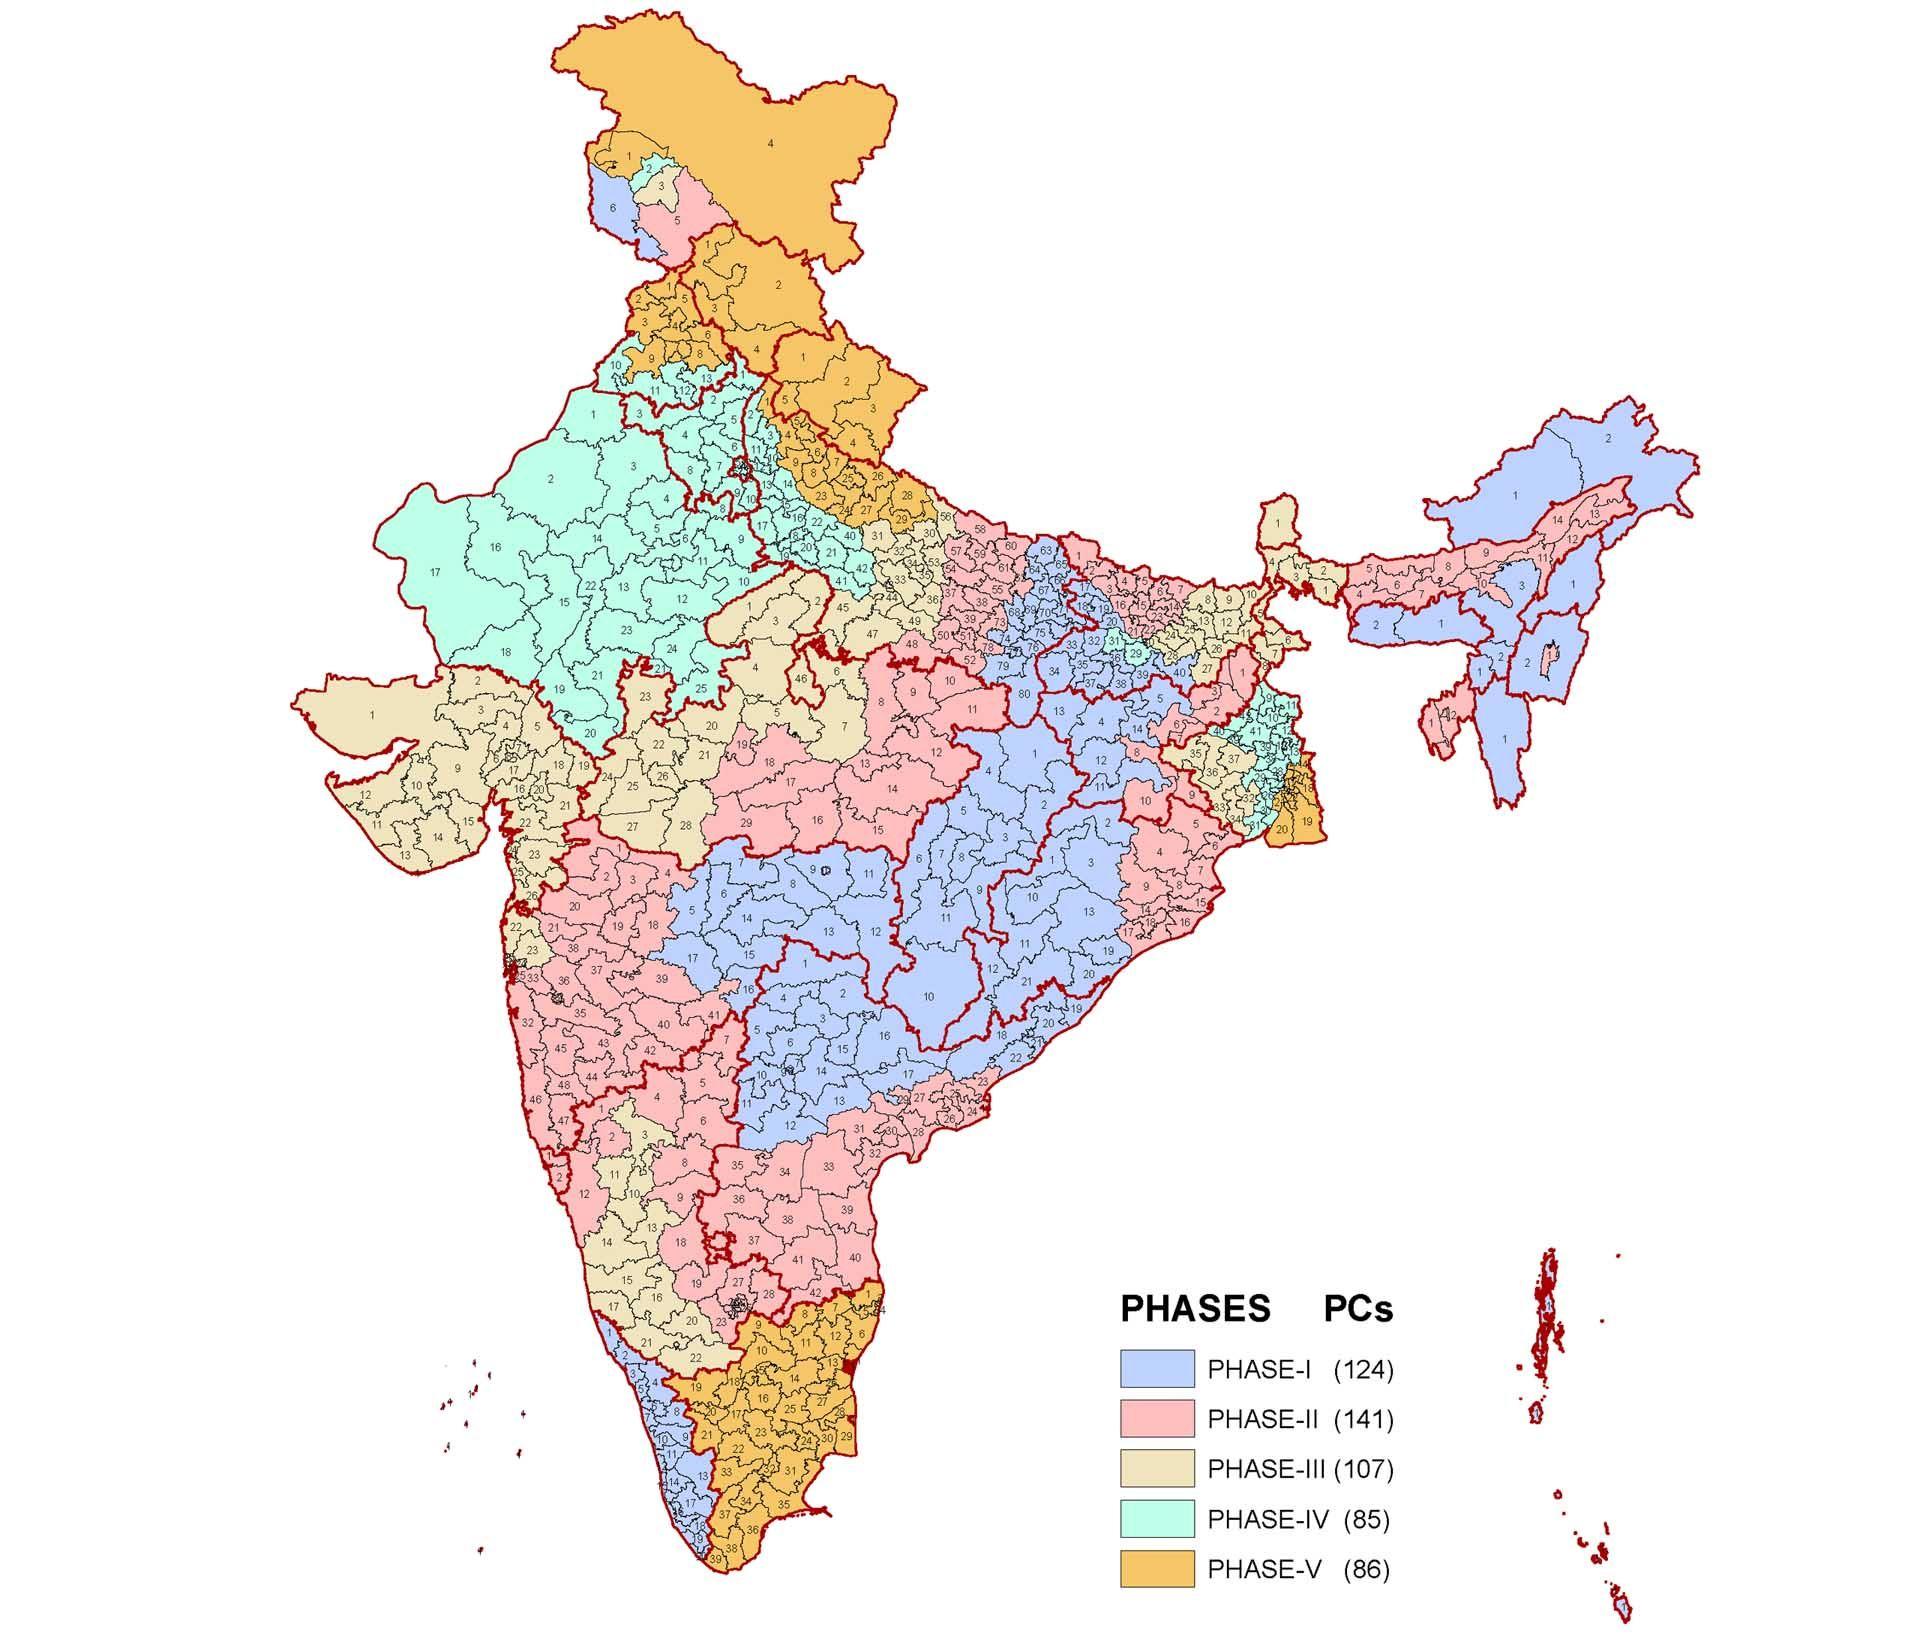 Learn States Of India For Children's In Hindi Precise India Map HD Pic. Map wallpaper, India map, Map